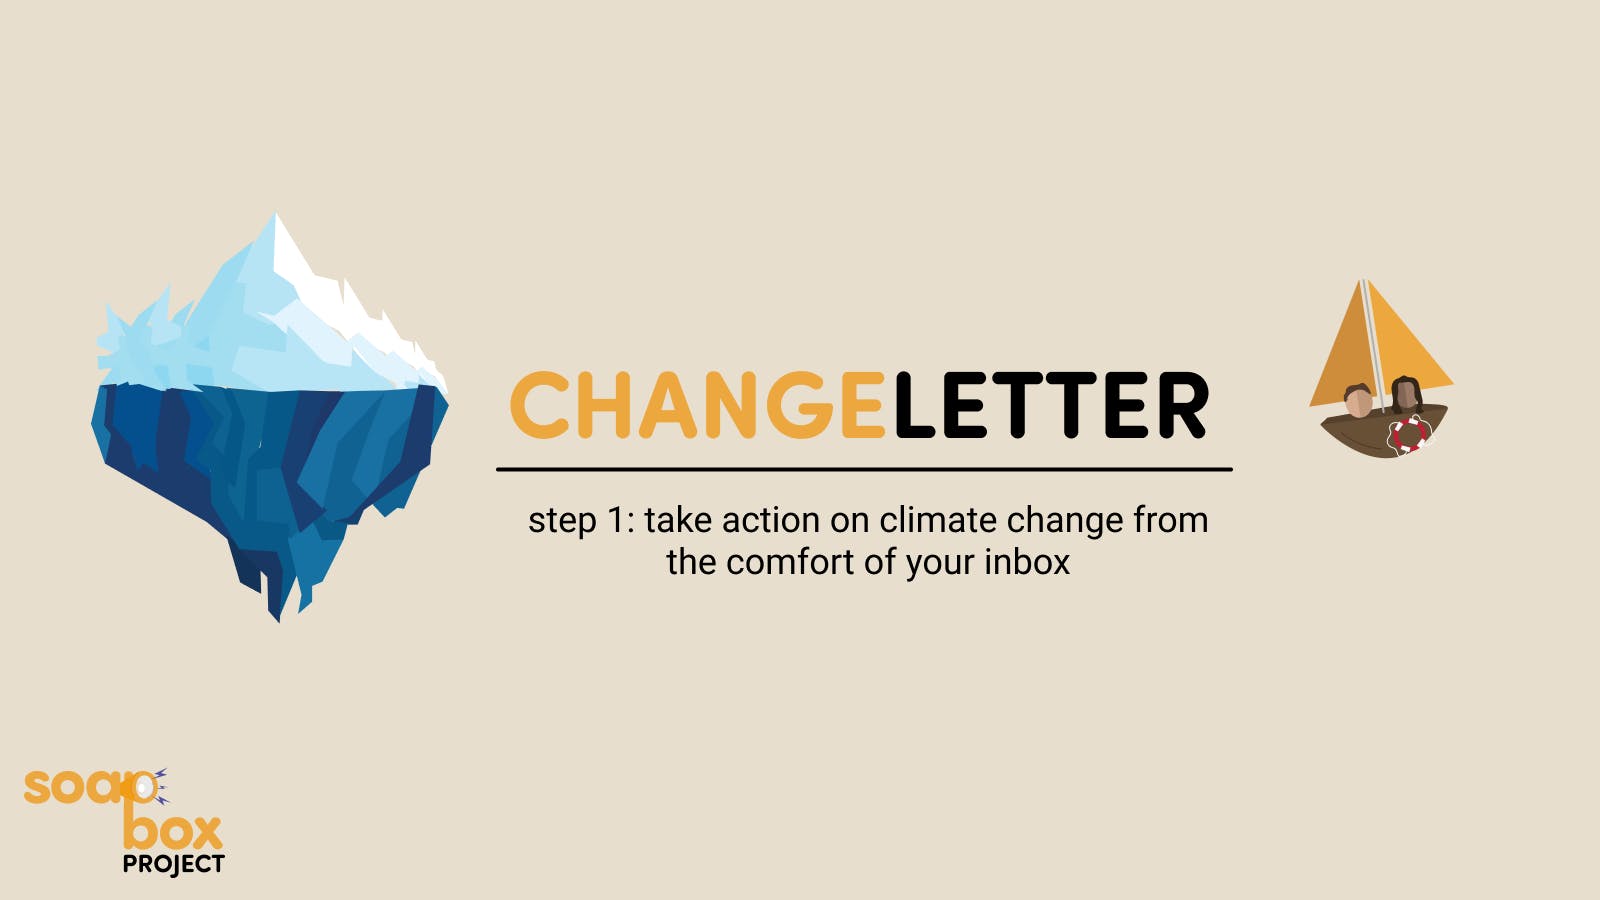 Changeletter banner with an iceberg and a lil boat. Step 1: take action on climate change from the comfort of your inbox.